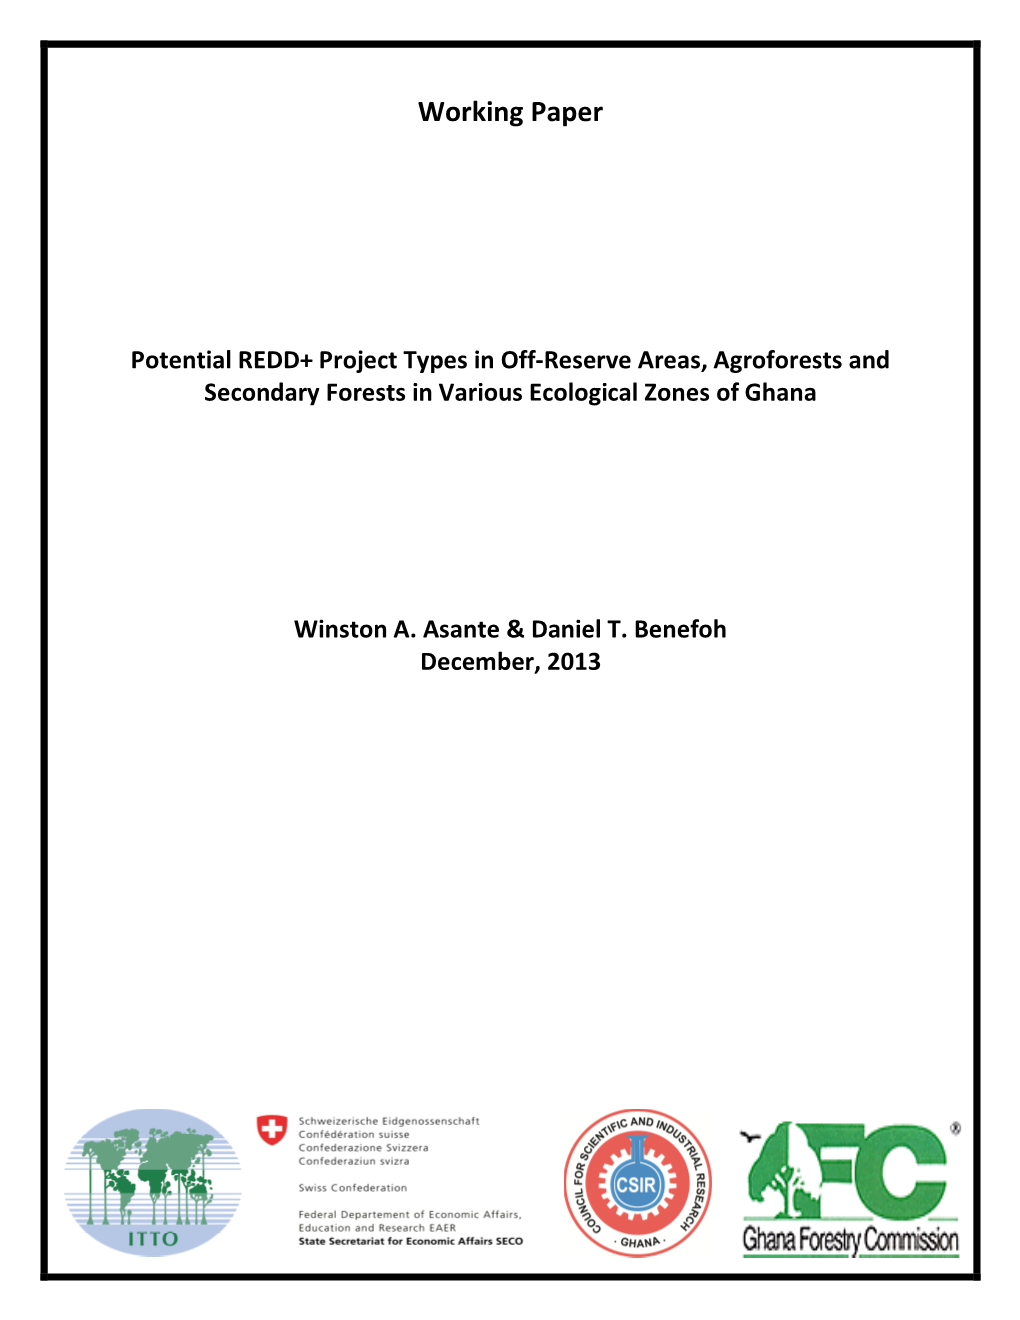 Potential REDD+ Project Types in Off-Reserve Areas, Agroforests and Secondary Forests in Various Ecological Zones of Ghana